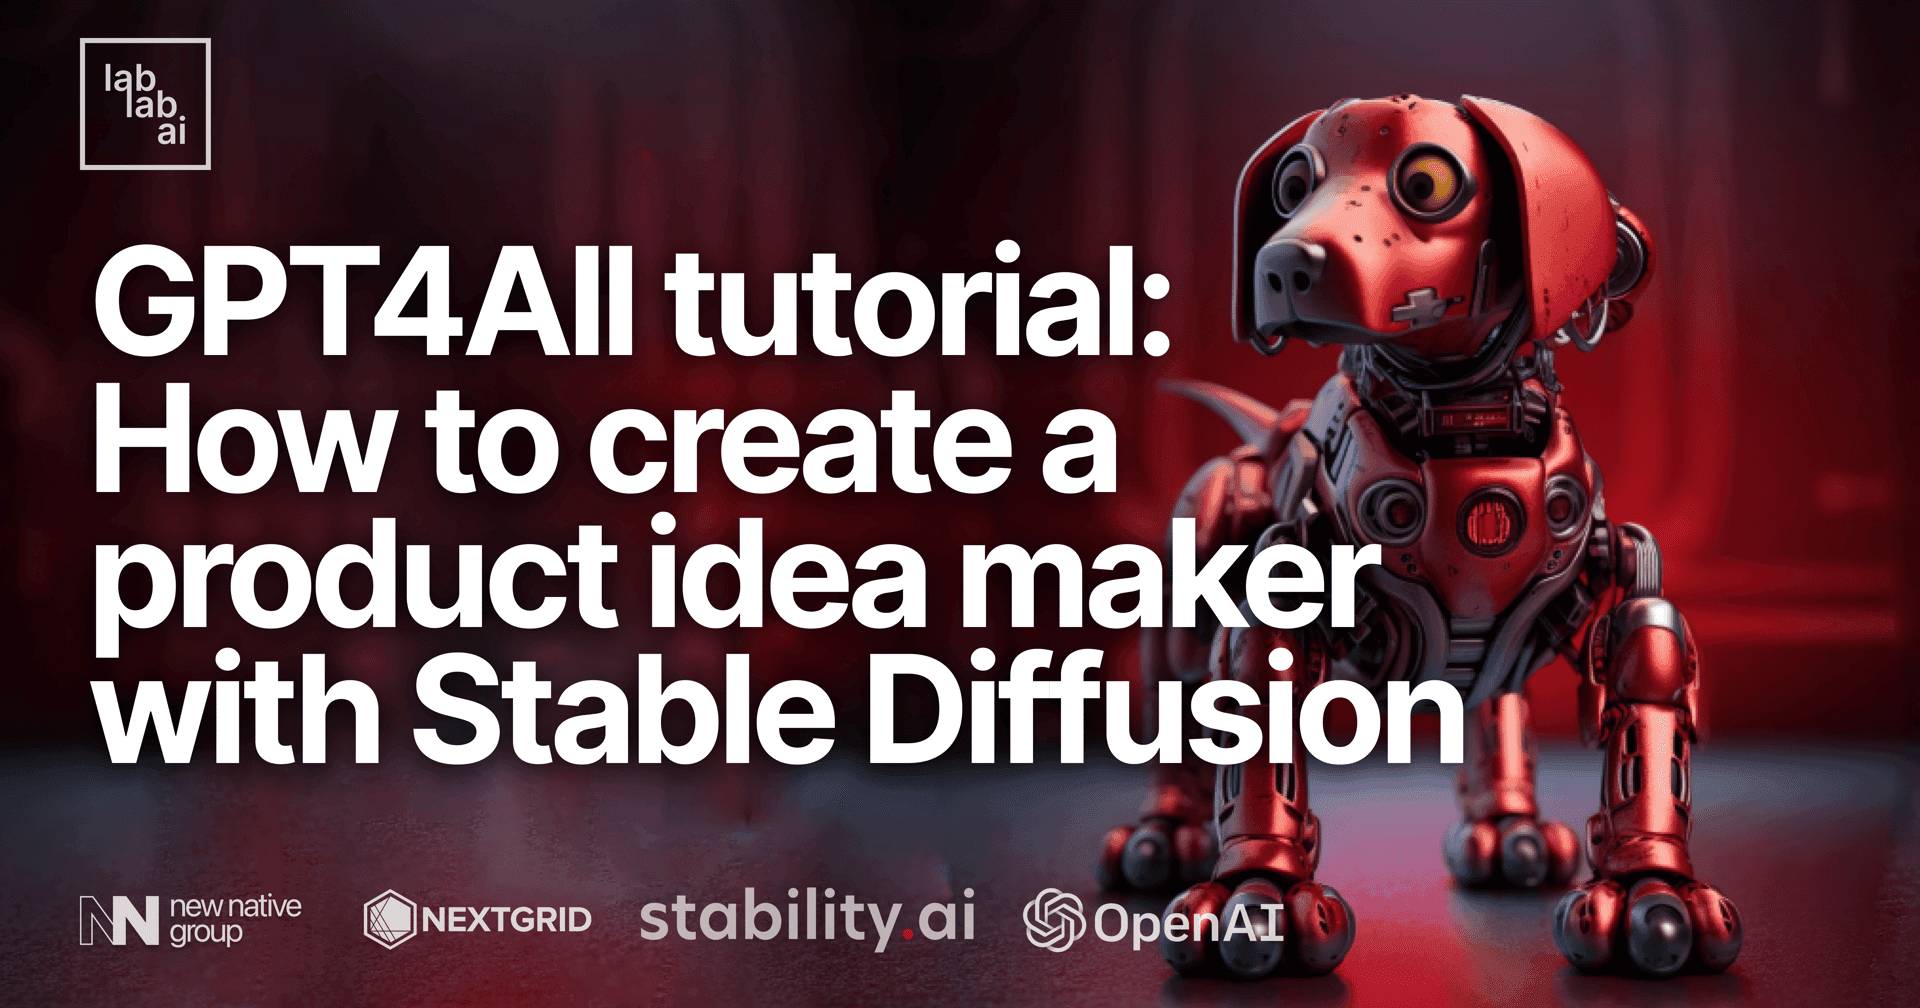 GPT4All tutorial: How to create a product idea maker with Stable Diffusion